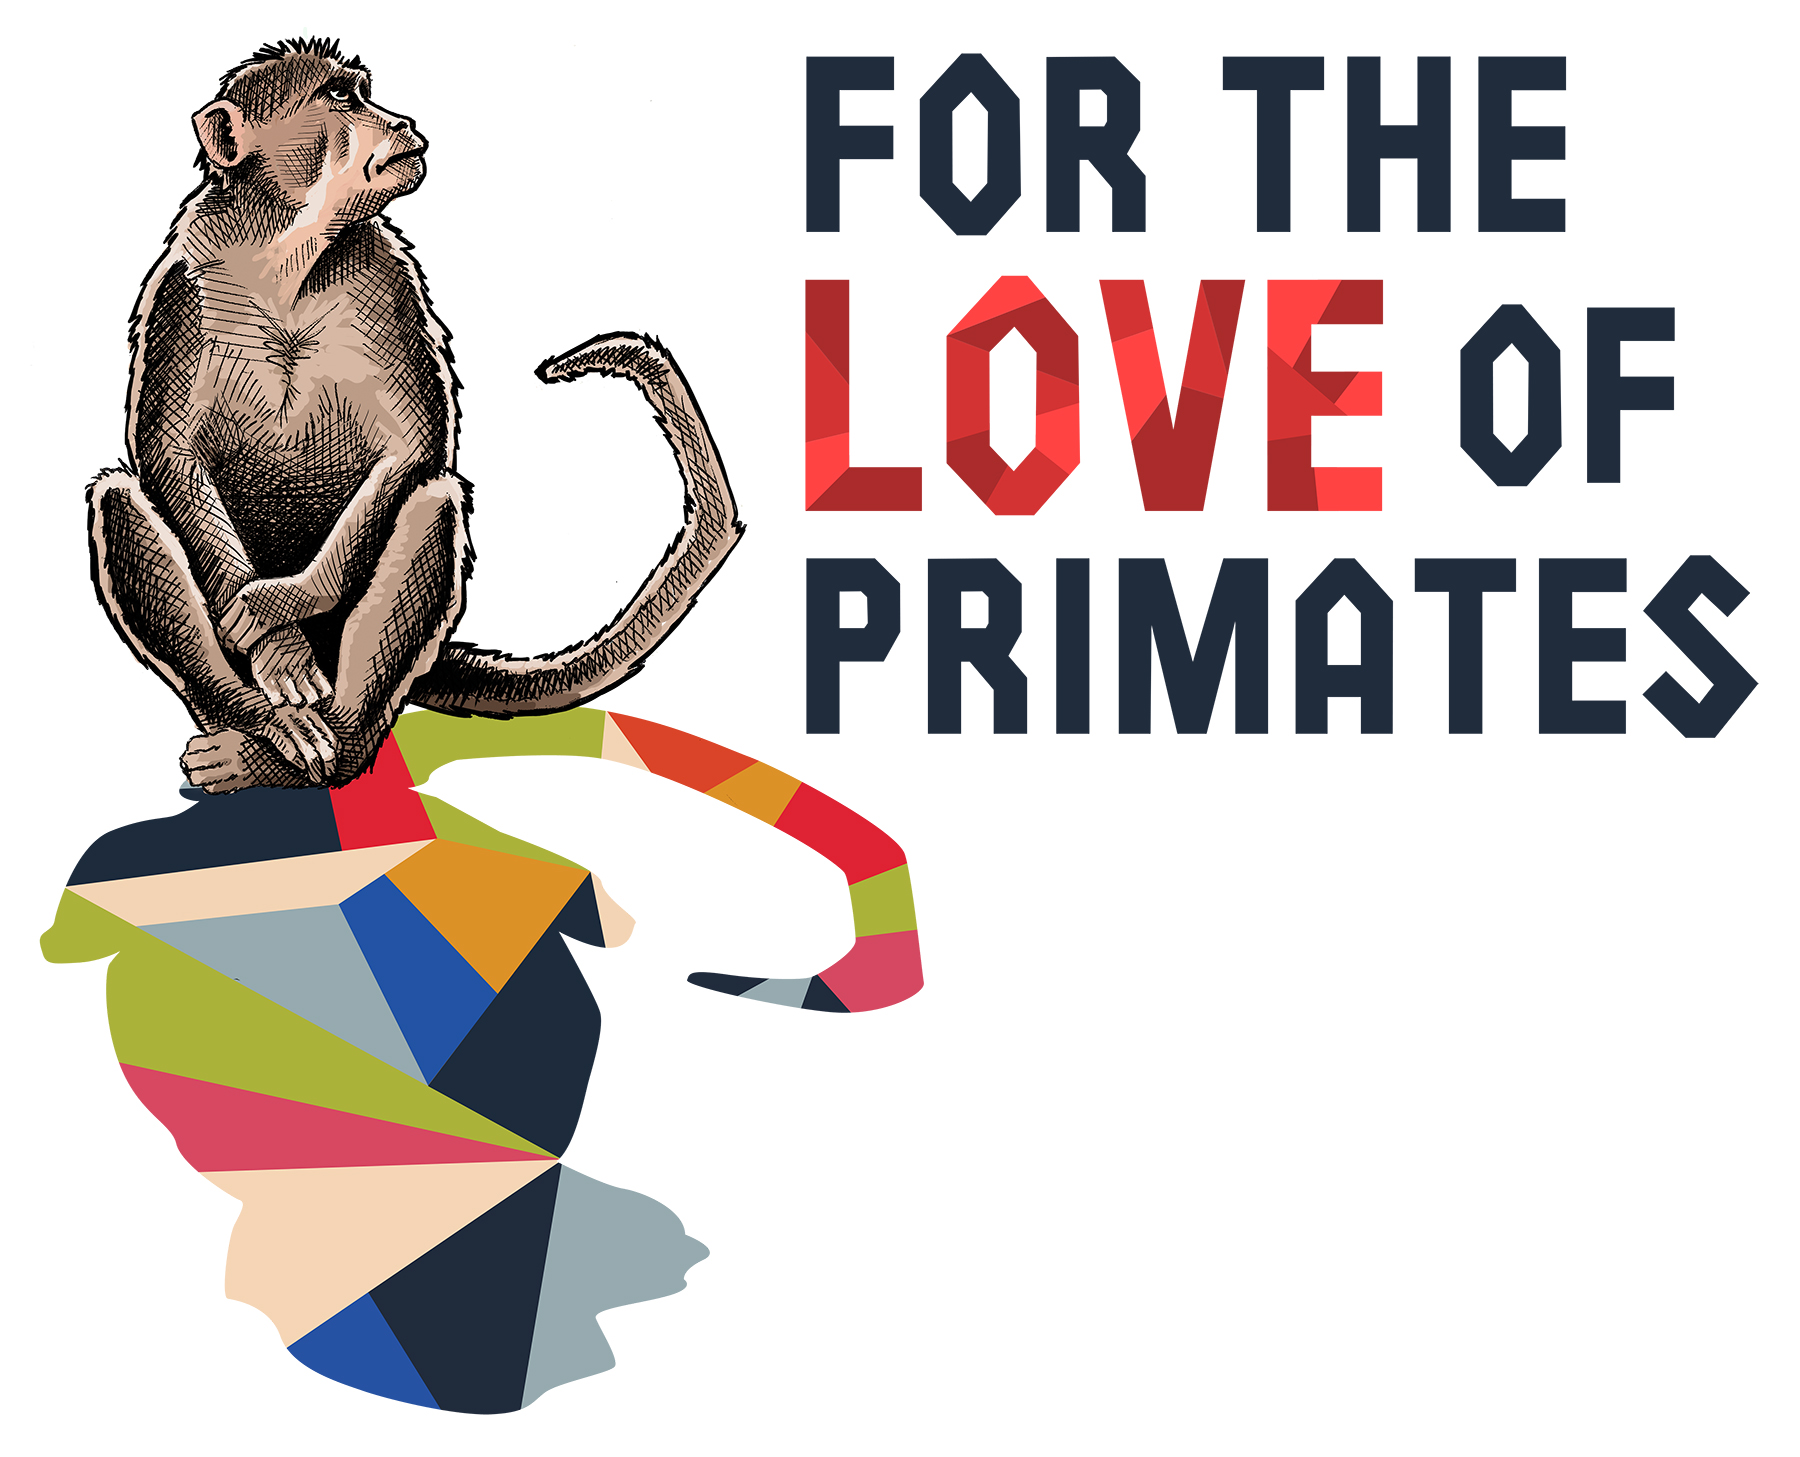 For the Love of Primates